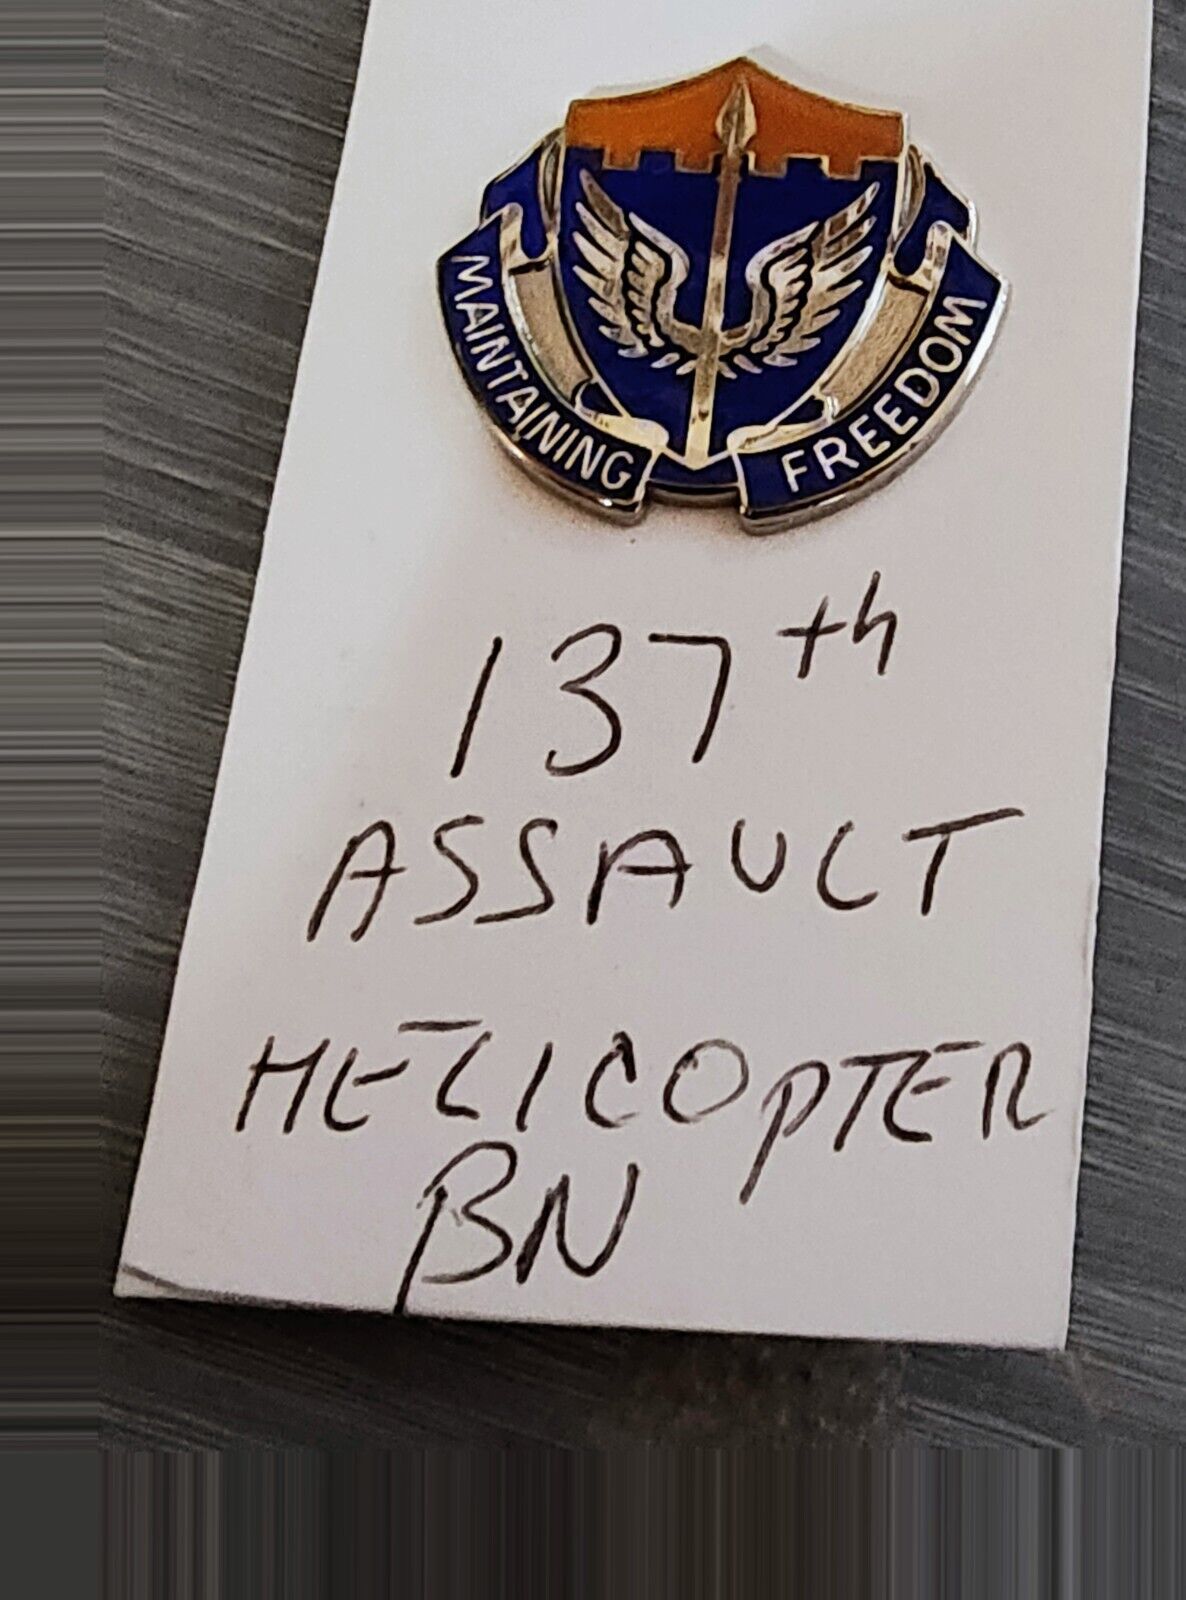 US Army unit insignia pin 137th Assault Helicopter Bn